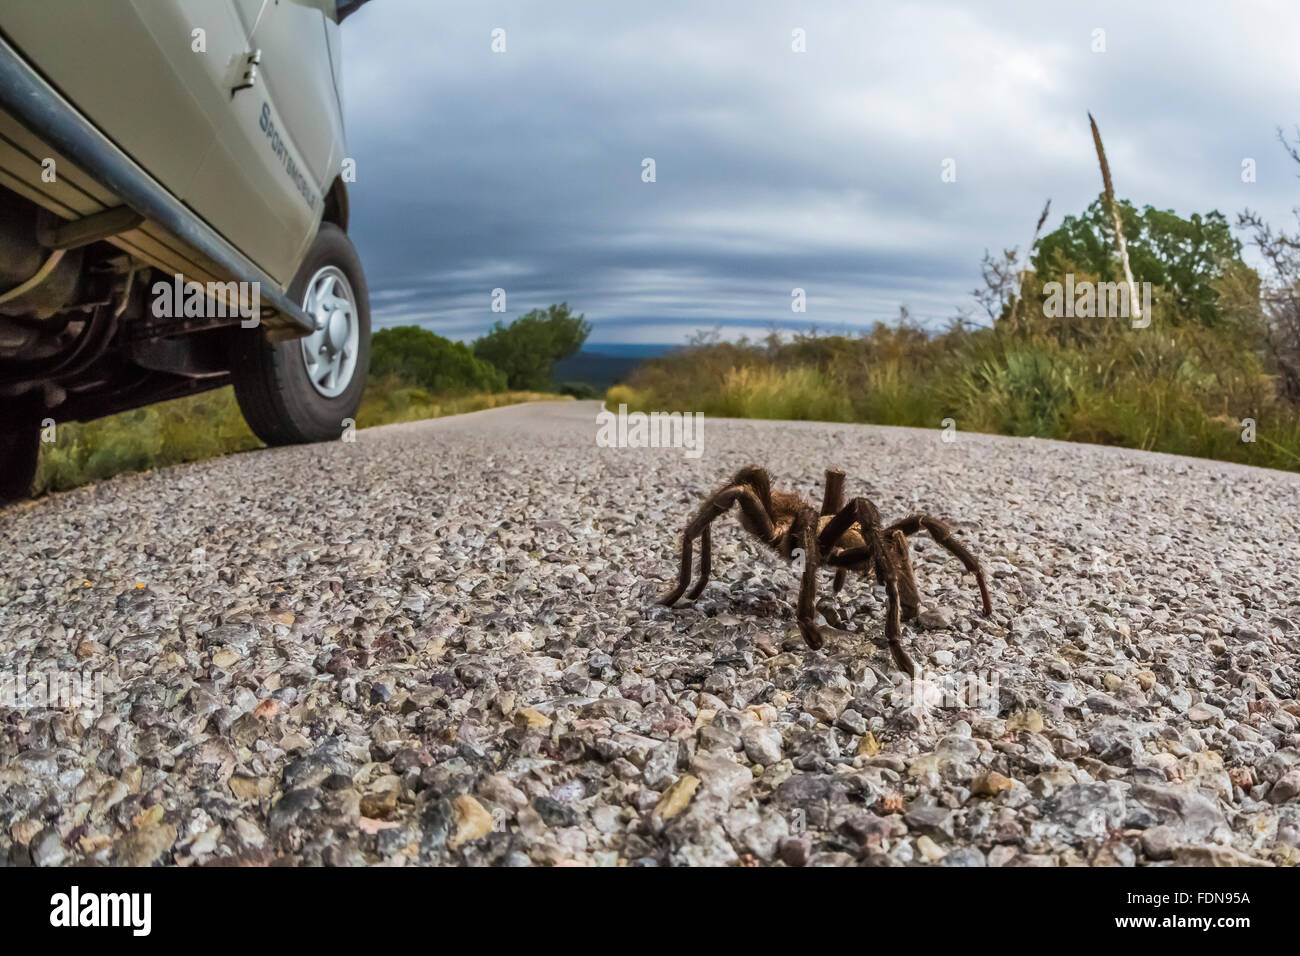 Male tarantula, Aphonopelma sp. in Chihuahuan Desert in Organ Mountains–Desert Peaks National Monument, New Mexico, USA Stock Photo